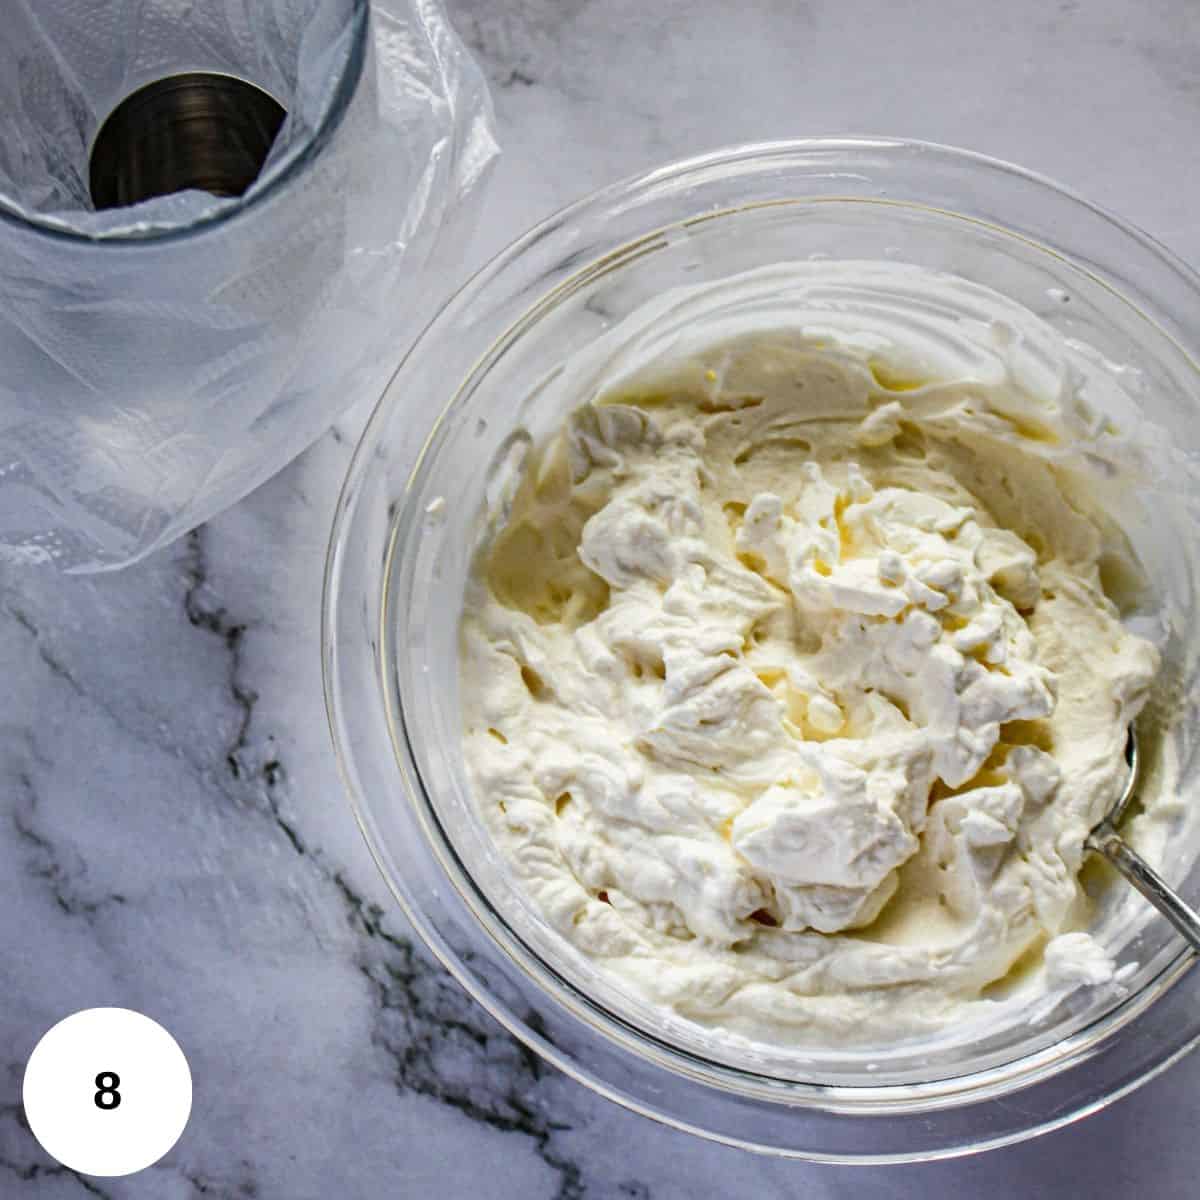 whipped cream in a clear bowl waiting to be piped onto the pie.